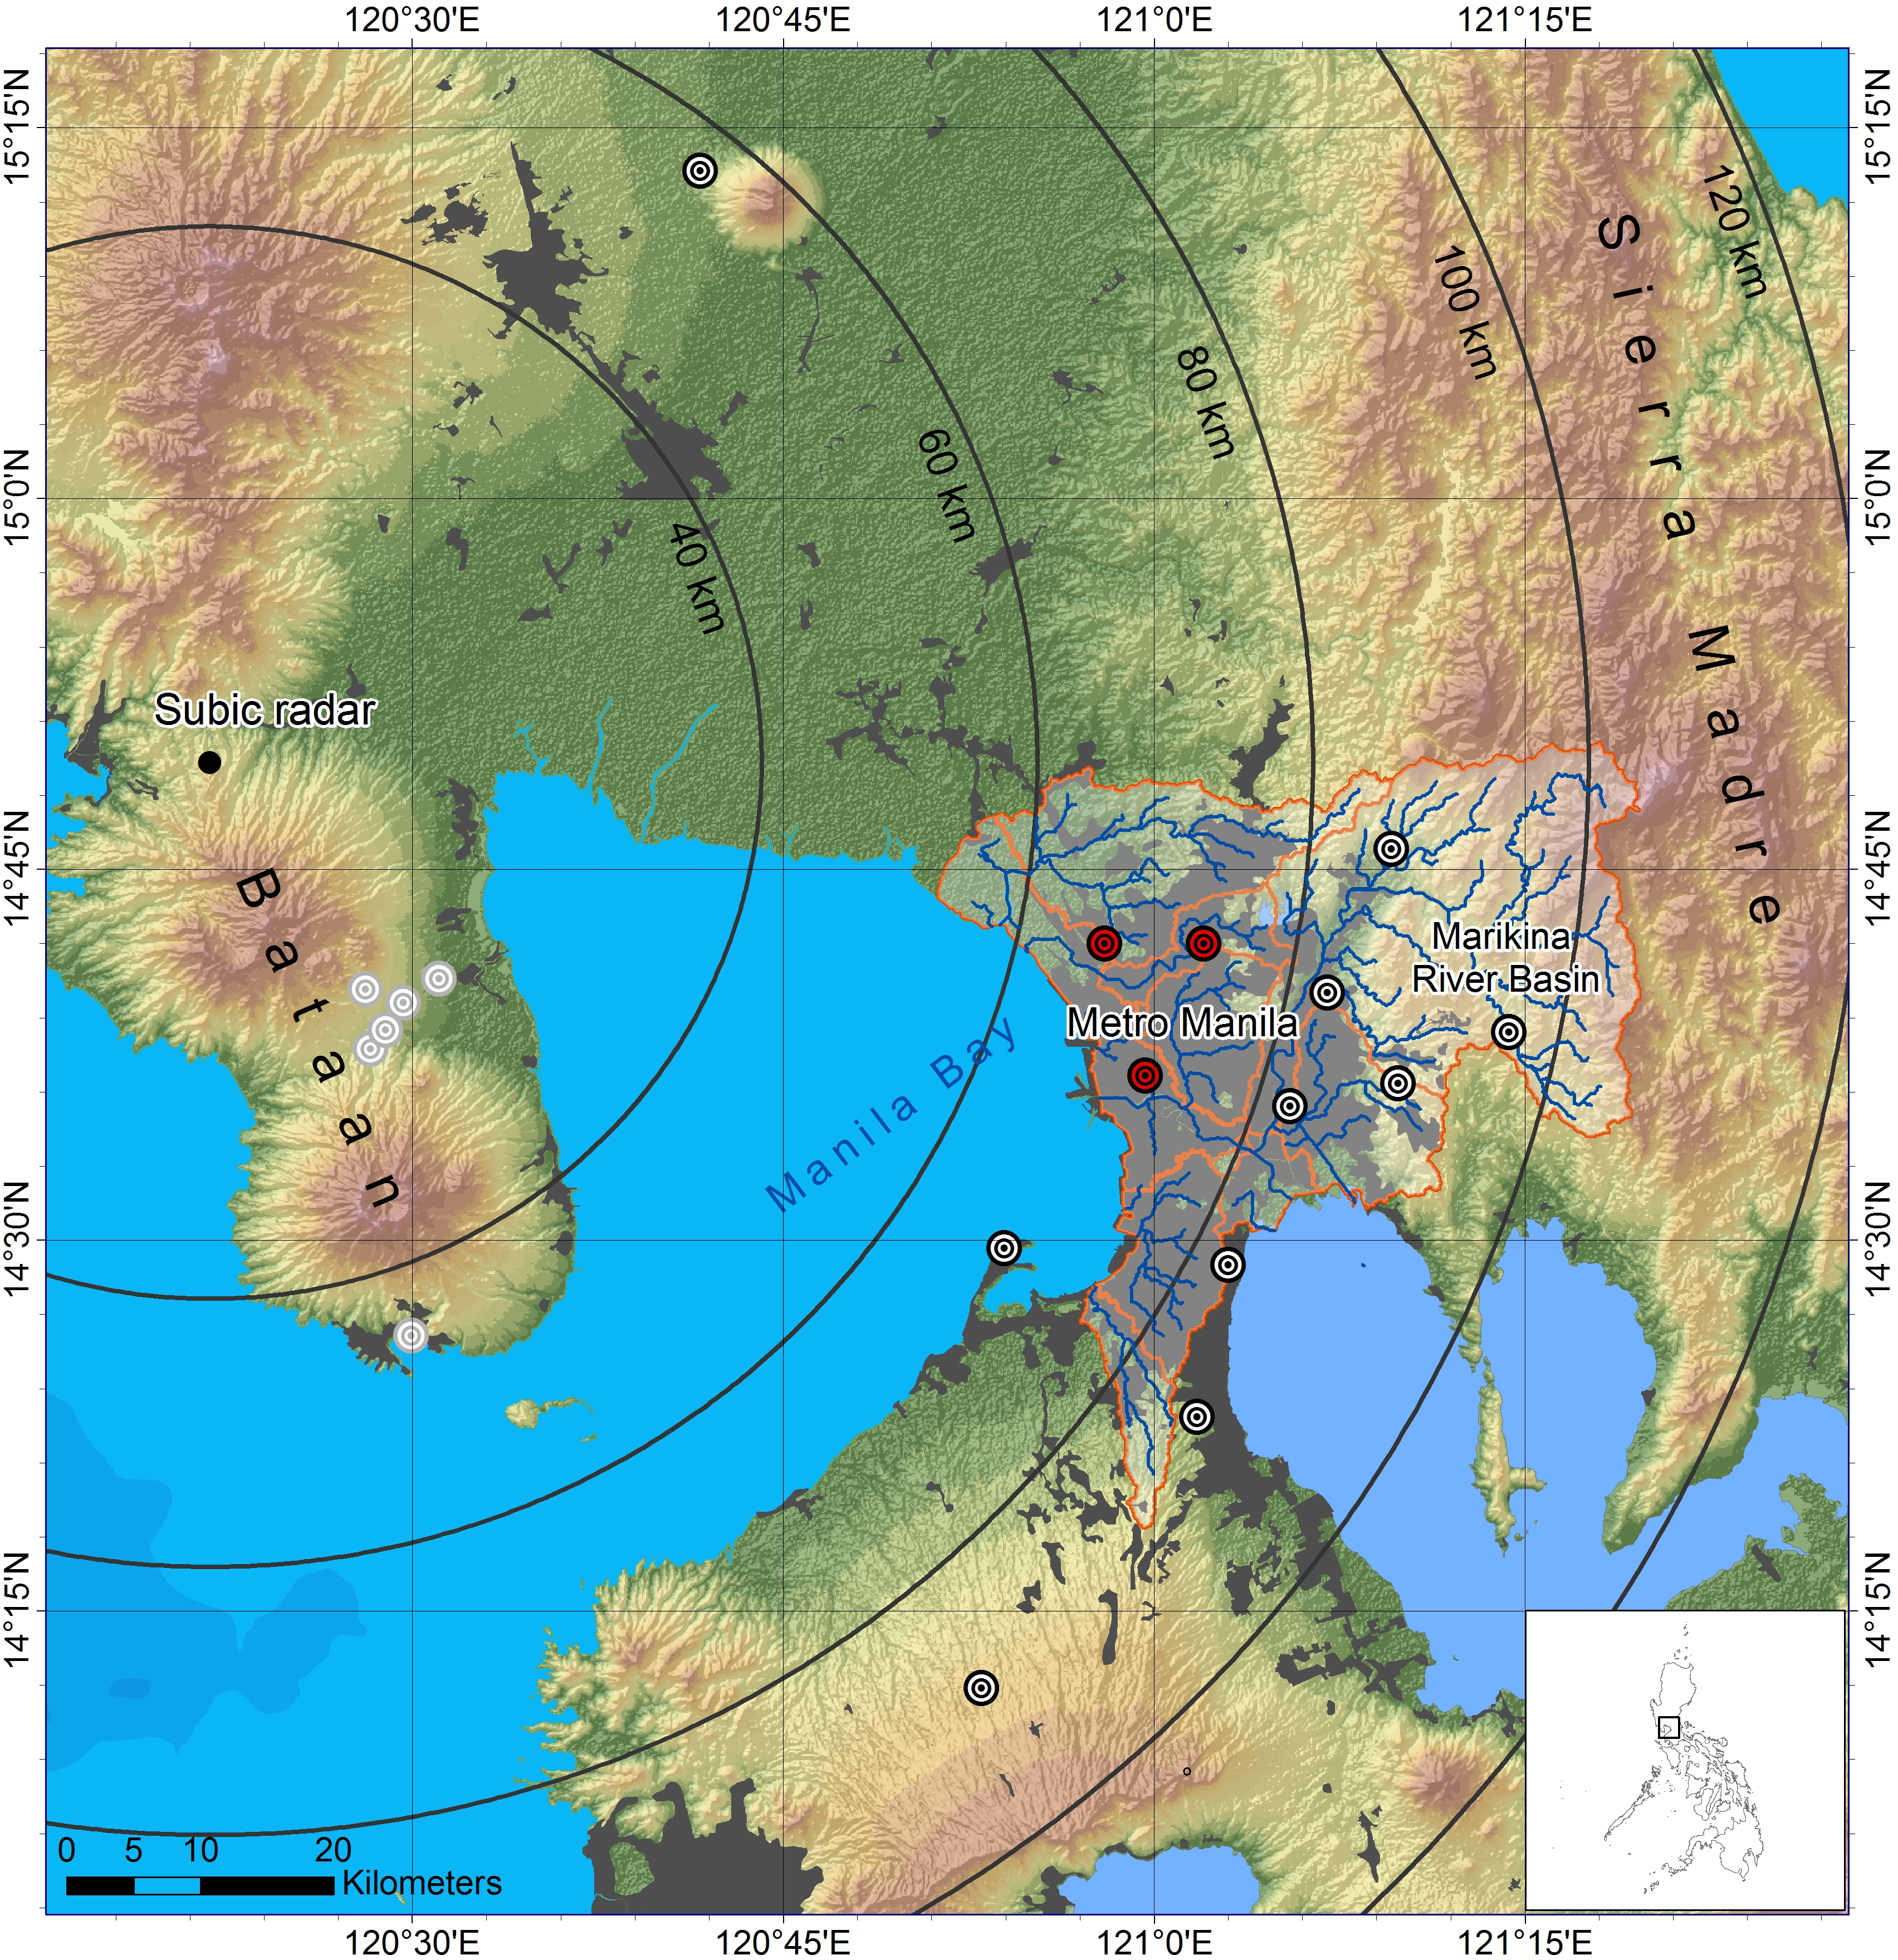 Geographical overview of the area, including Subic radar, different radar range radii as orientation, and the NOAH rain gauges (small circles). The red circles are the gauges shown in Figure 2.2. The gauges with grey circles have been ignored in this study, because the entire Bataan Peninsula is affected by massive beam shielding. Urban areas (including Metropolitan Manila) are shown in grey. Major rivers (blue lines) draining to Metropolitan Manila are shown together with their drainage basins (orange borders).